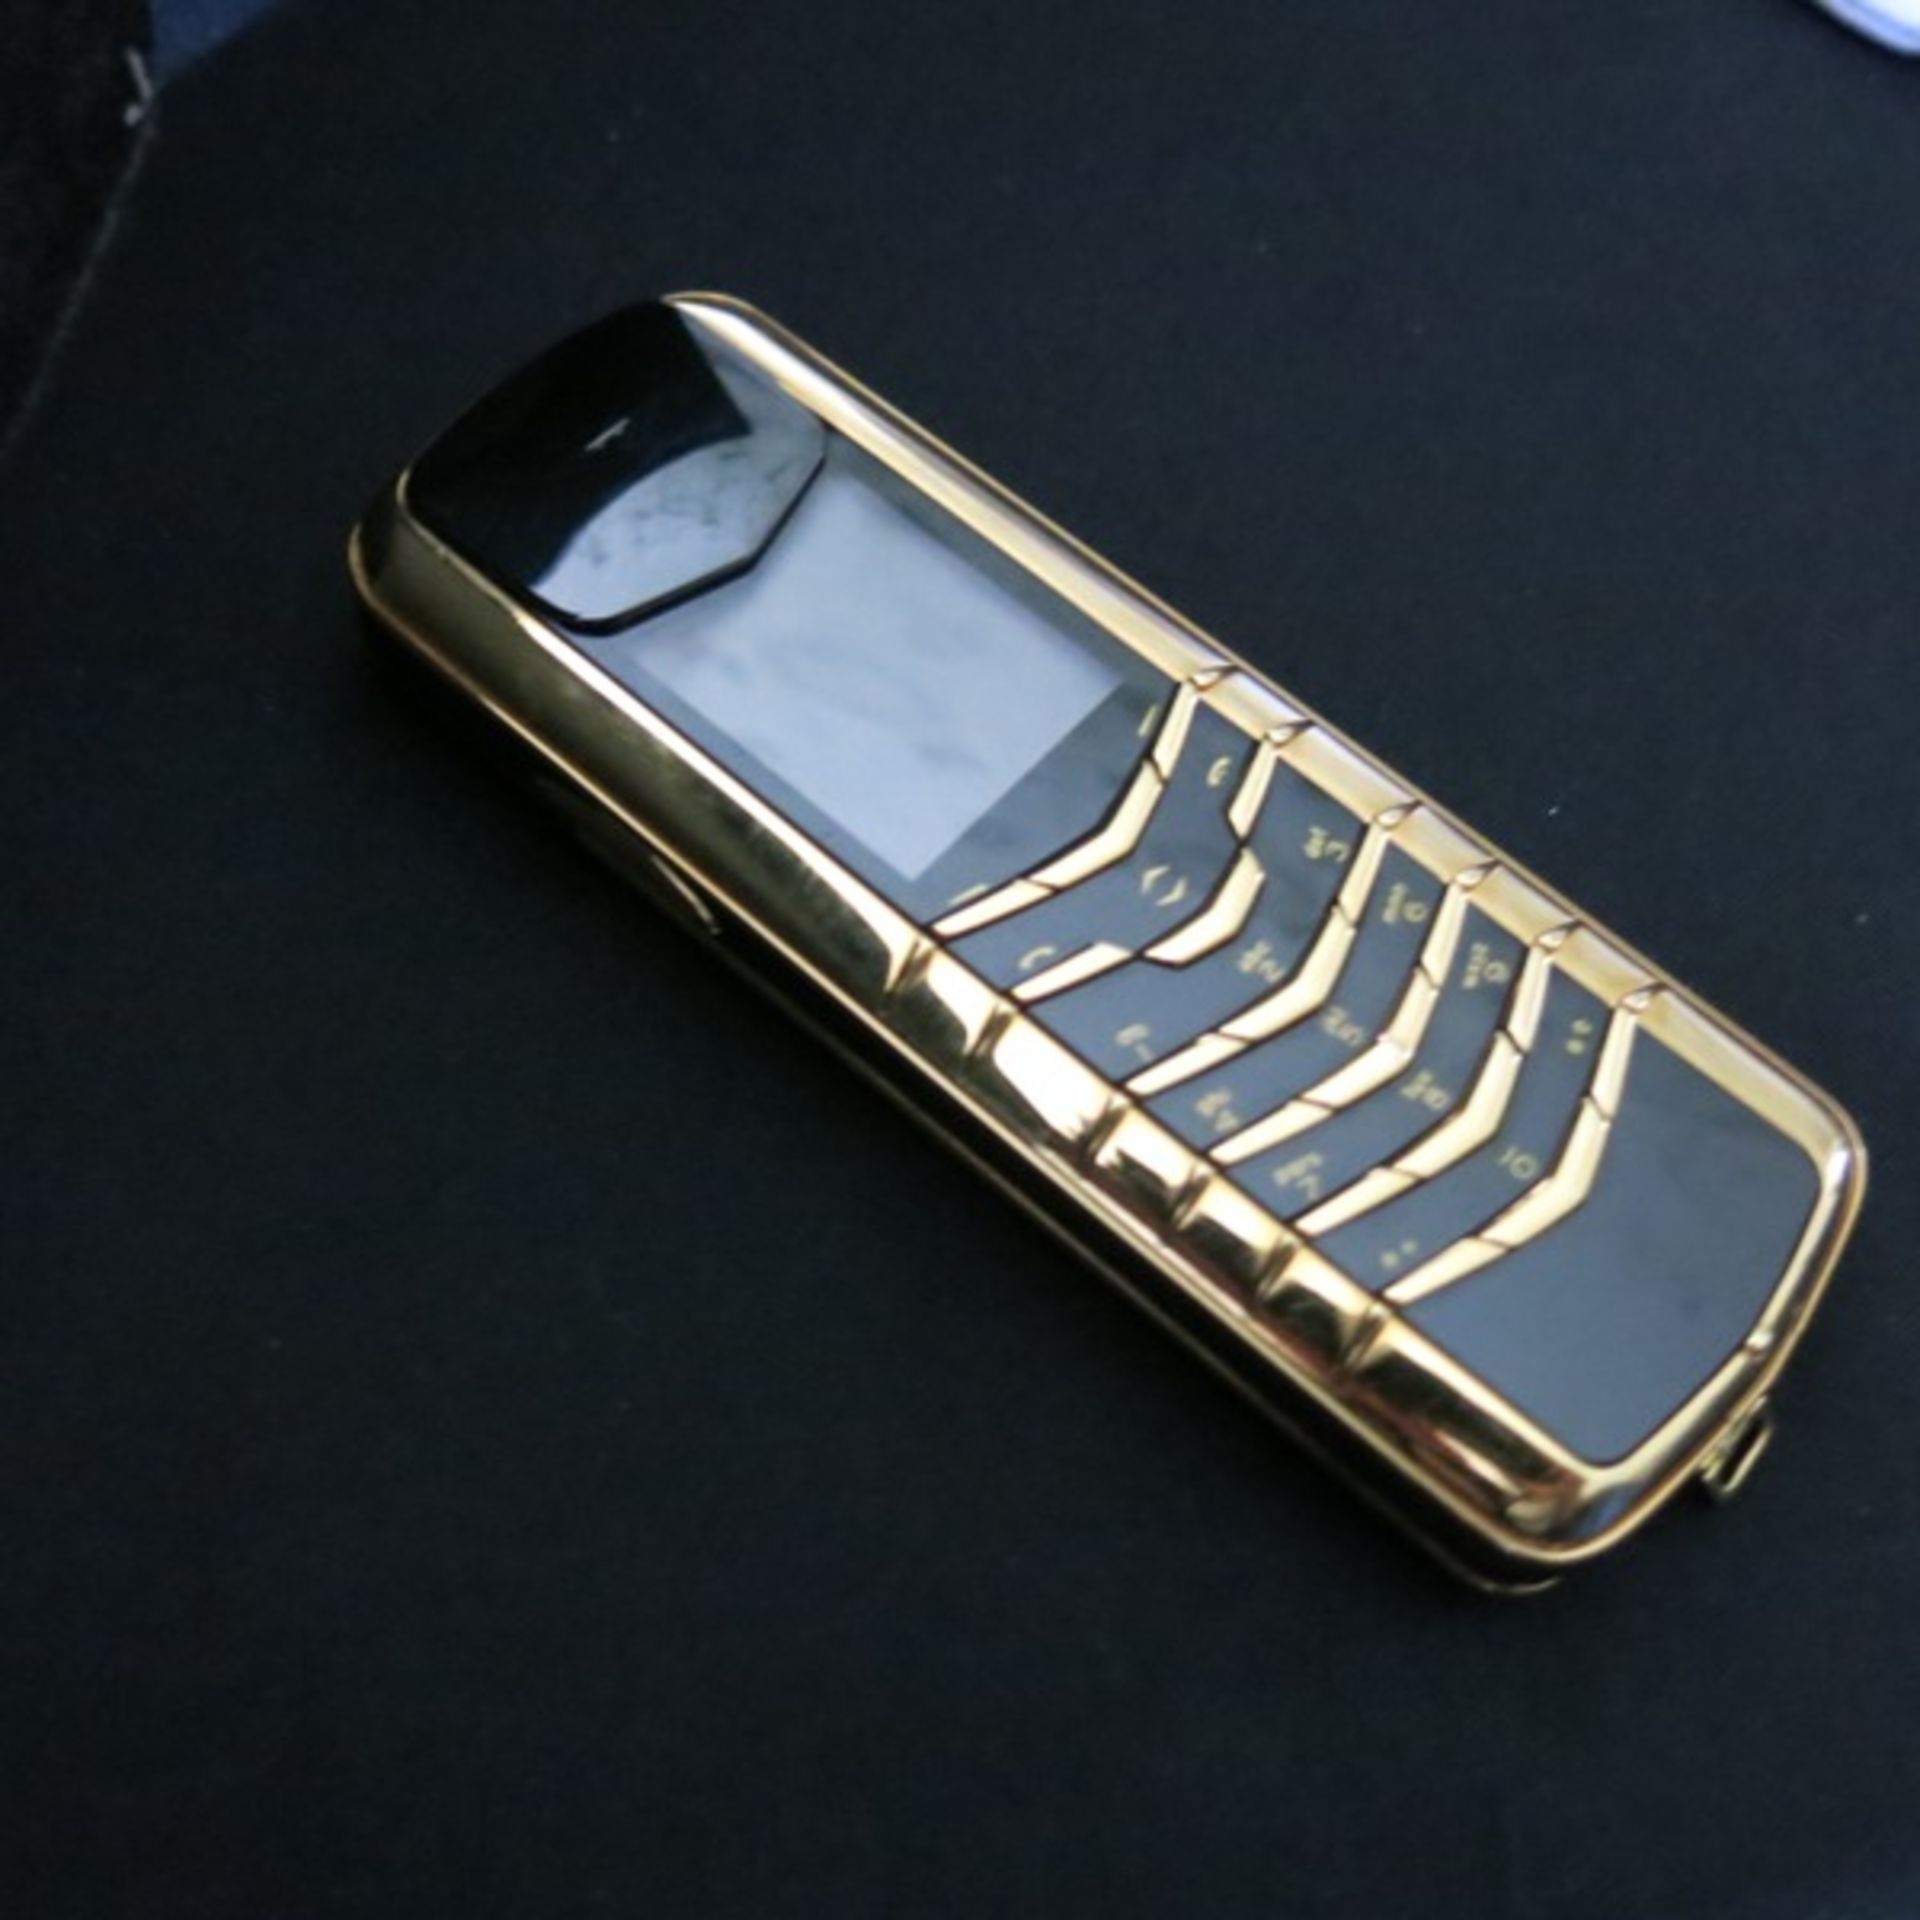 Vertu Signature Classic Phone in 18kt Brushed Yellow Gold with 18kt Polished Yellow Gold - Image 6 of 7